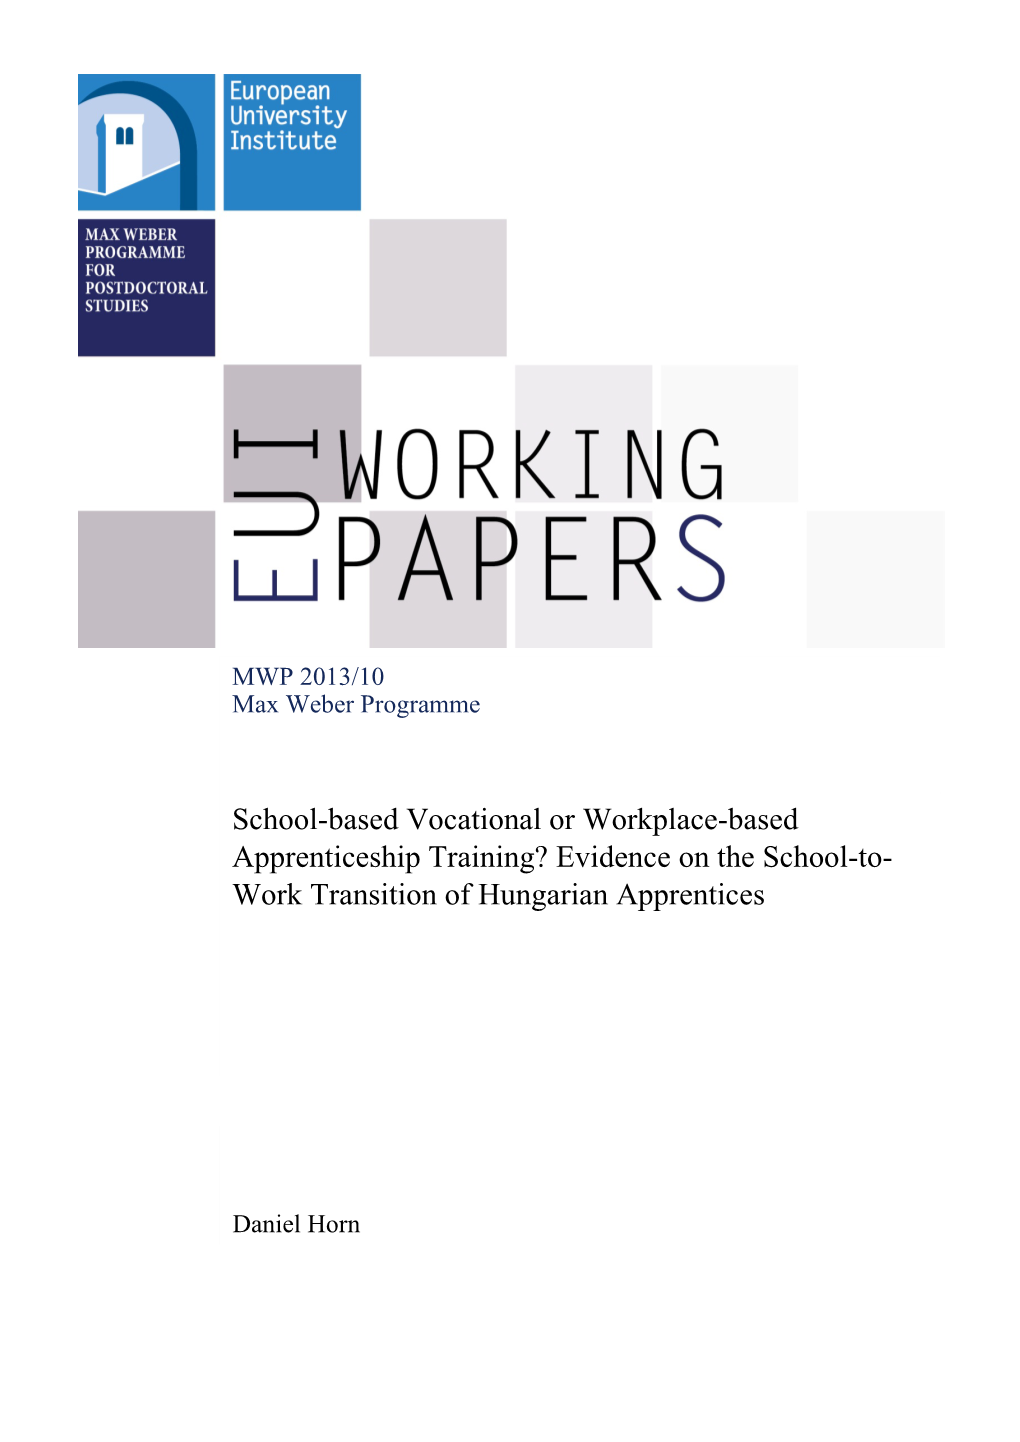 School-Based Vocational Or Workplace-Based Apprenticeship Training? Evidence on the School-To